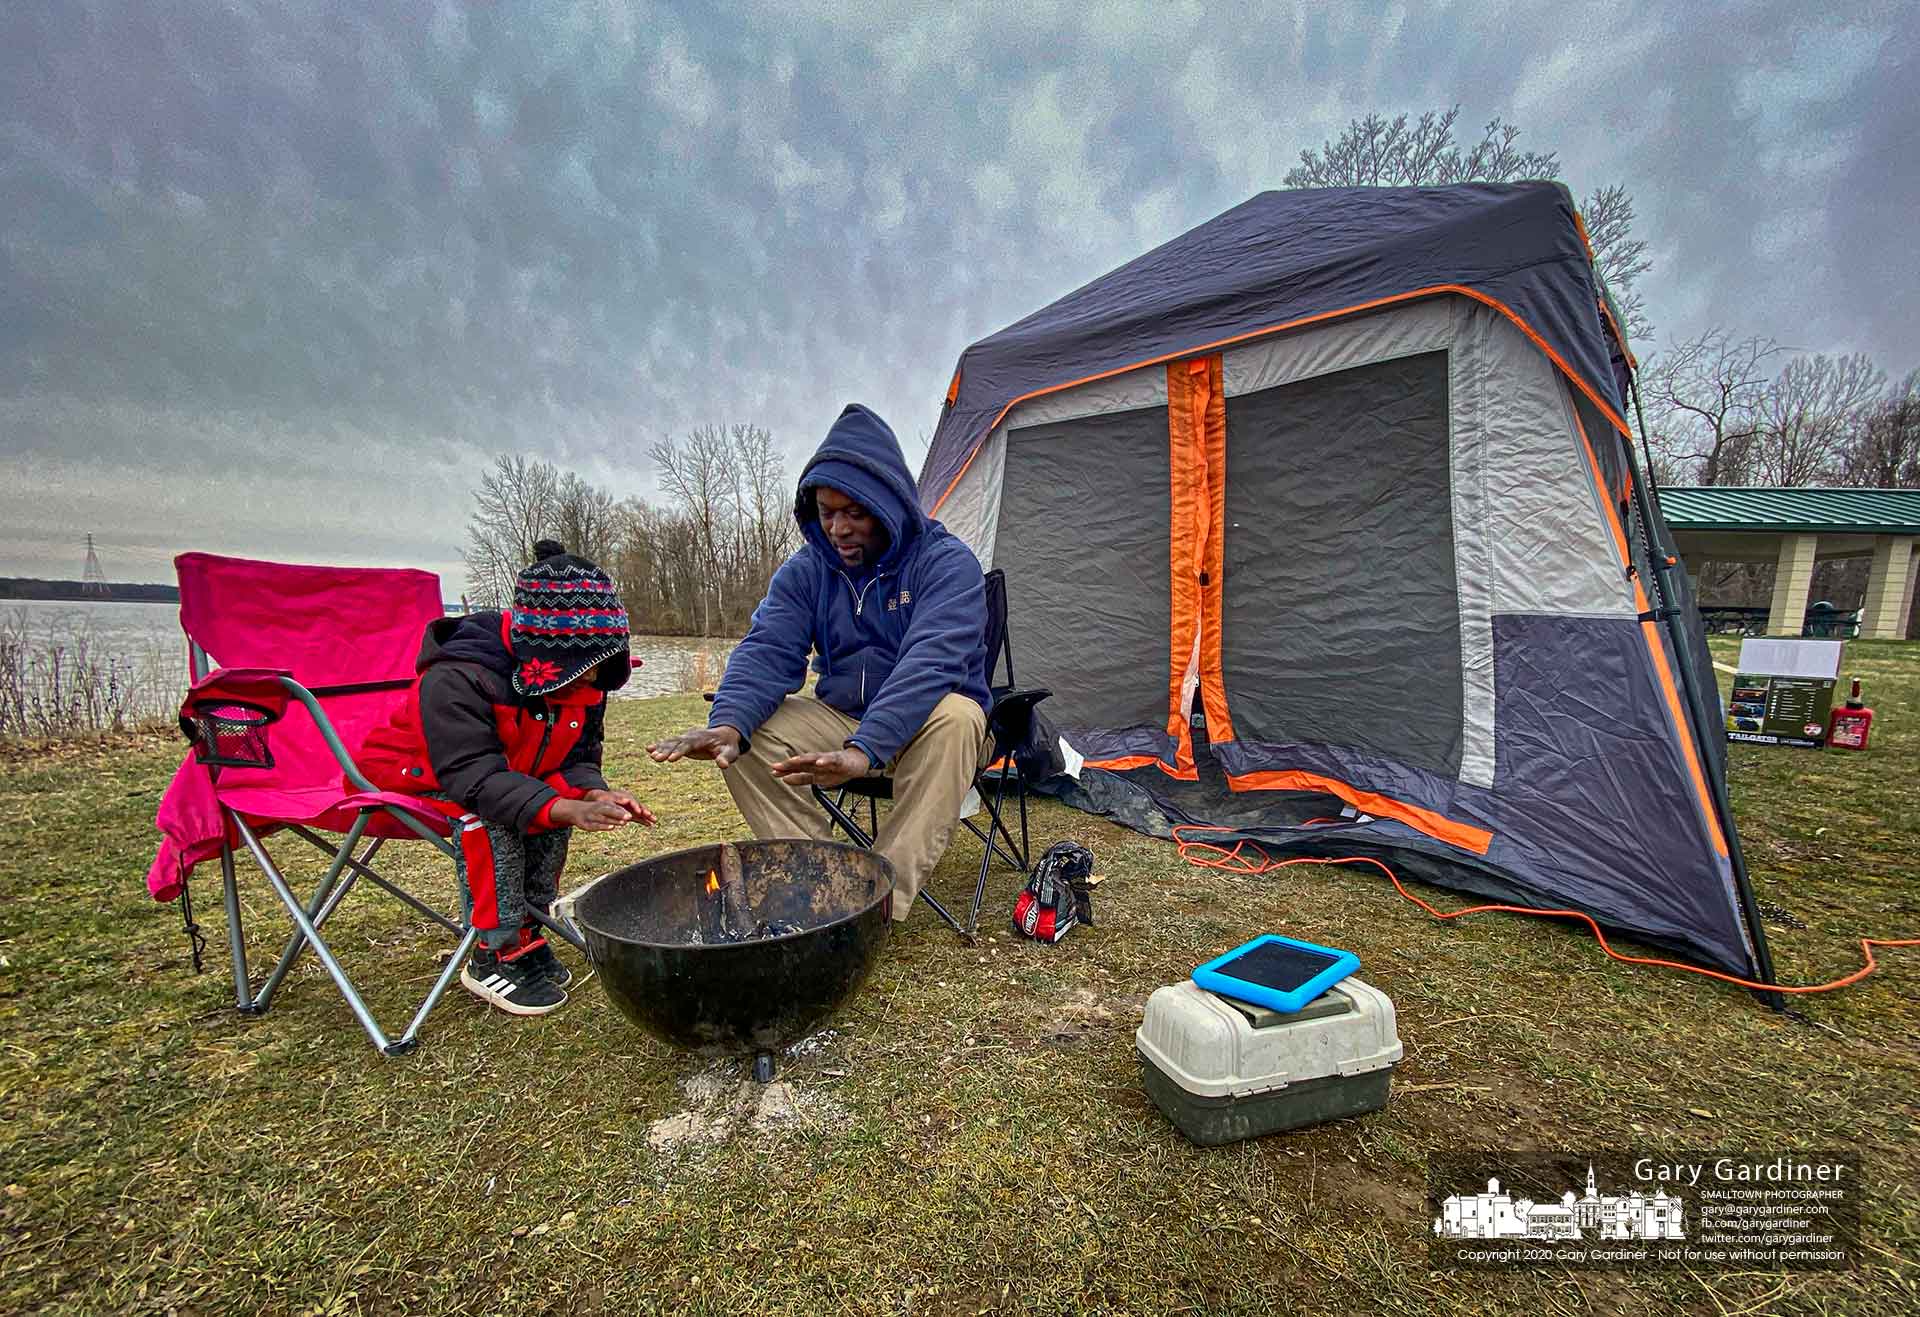 Father and son warm their hands over a small fire they built while pitching the family's tent at Red Bank Park on an outing during the pandemic. My Final Photo for March 22, 2020.